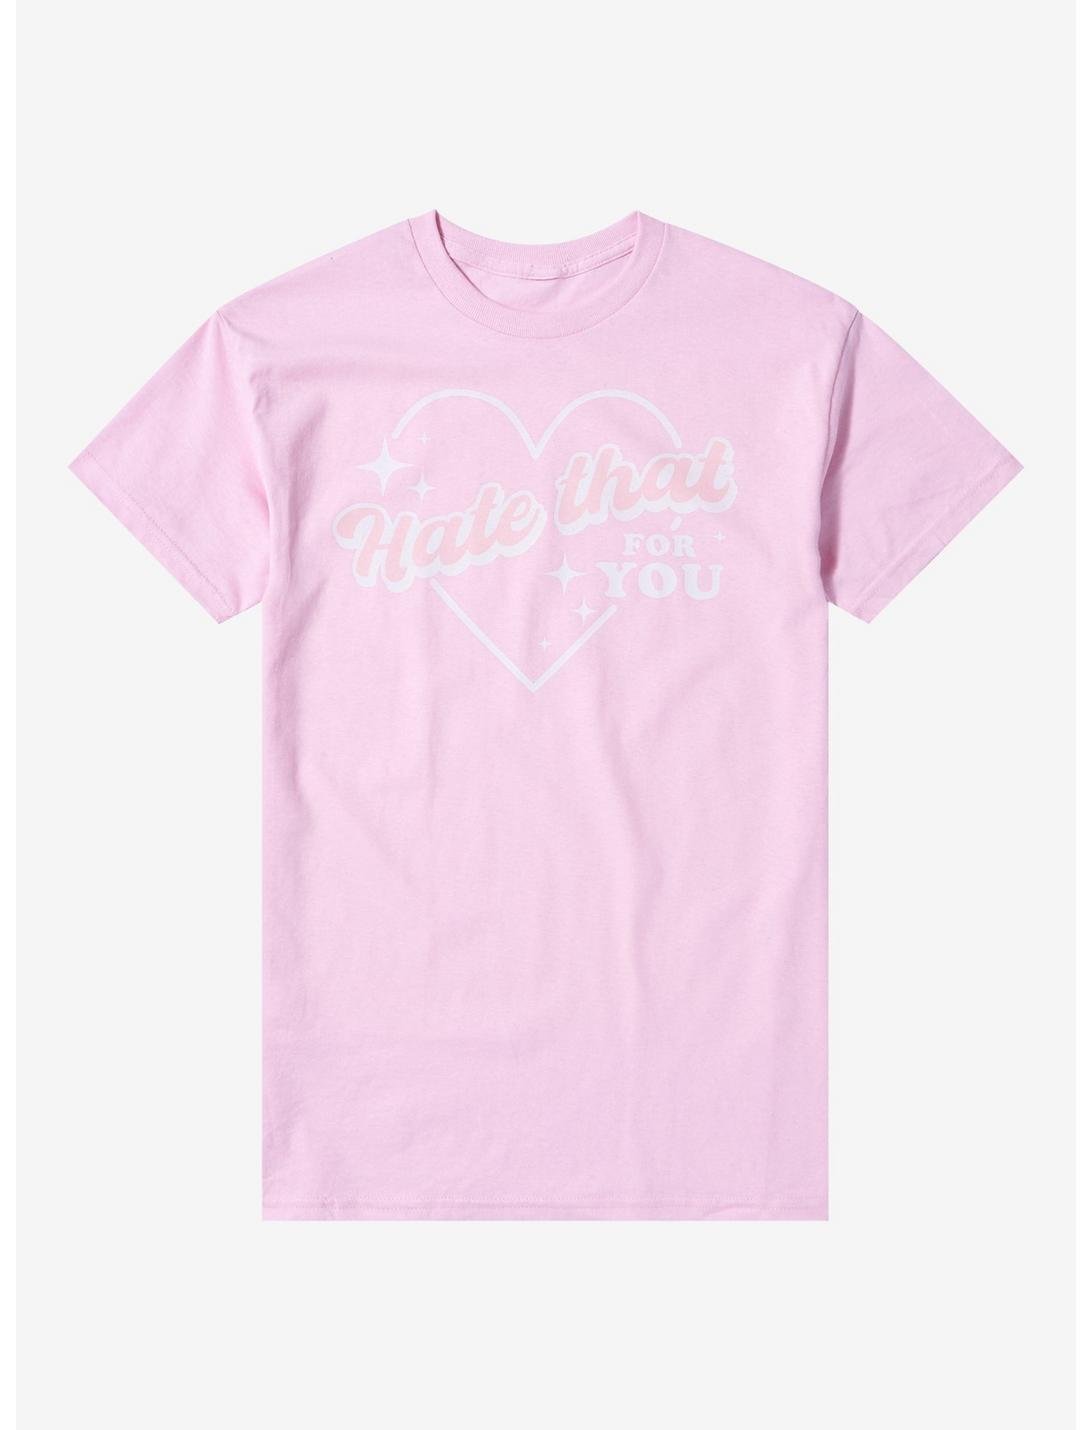 Hate That For You Boyfriend Fit Girls T-Shirt, MULTI, hi-res